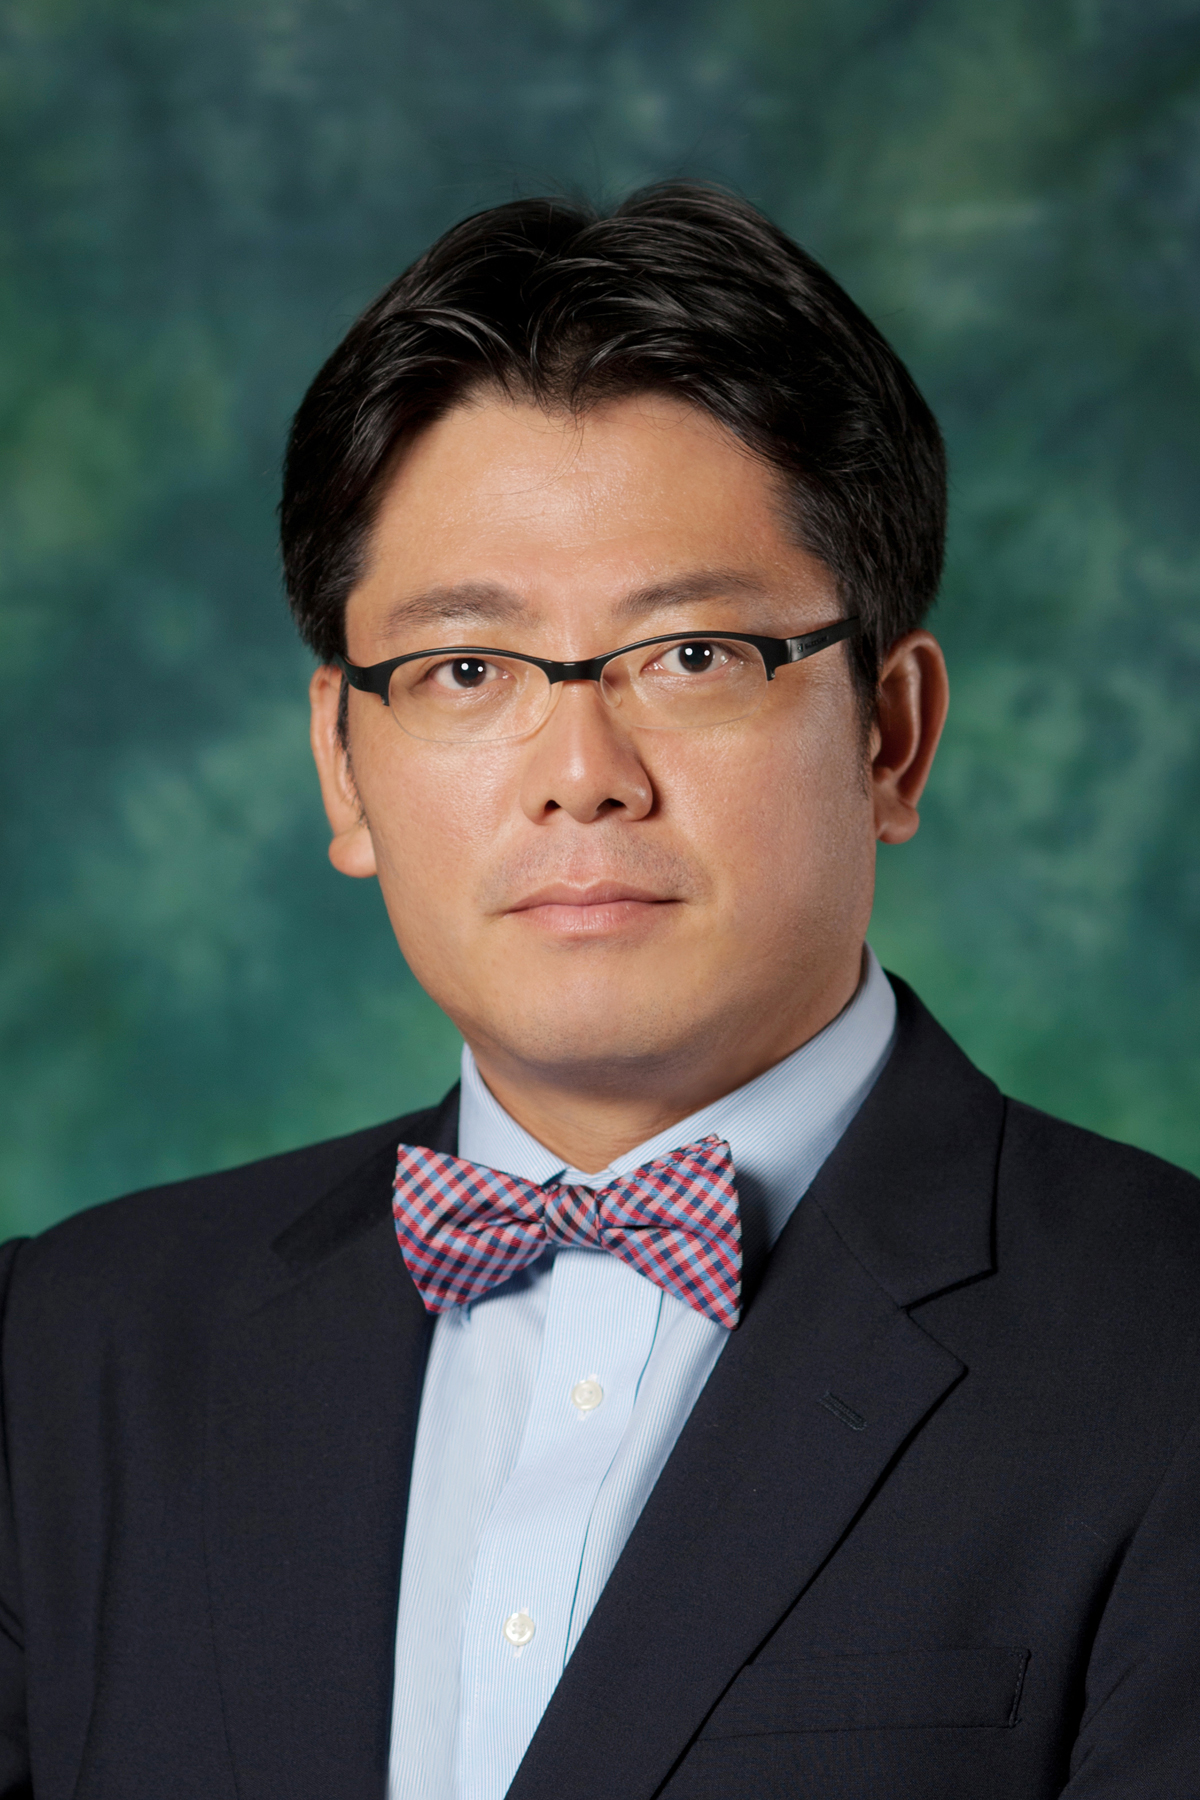 Young Hoon Kim - Associate Professor in the Department of Hospitality and Tourism Management